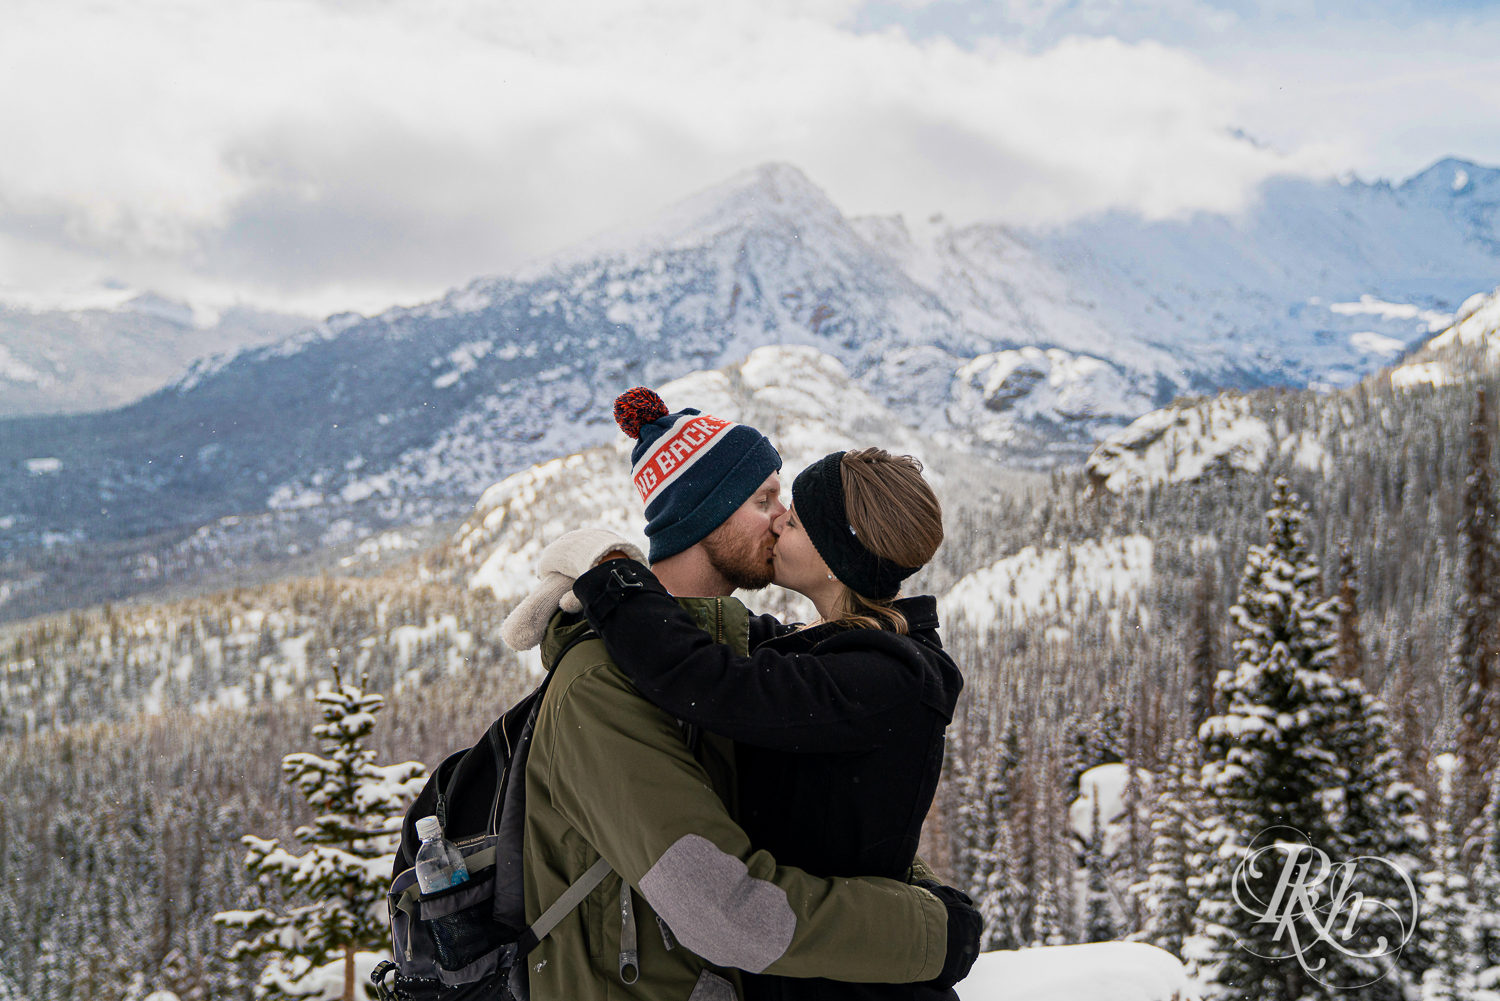 Man and woman in winter jackets and hats kiss in front of Rocky Mountains view in Colorado.